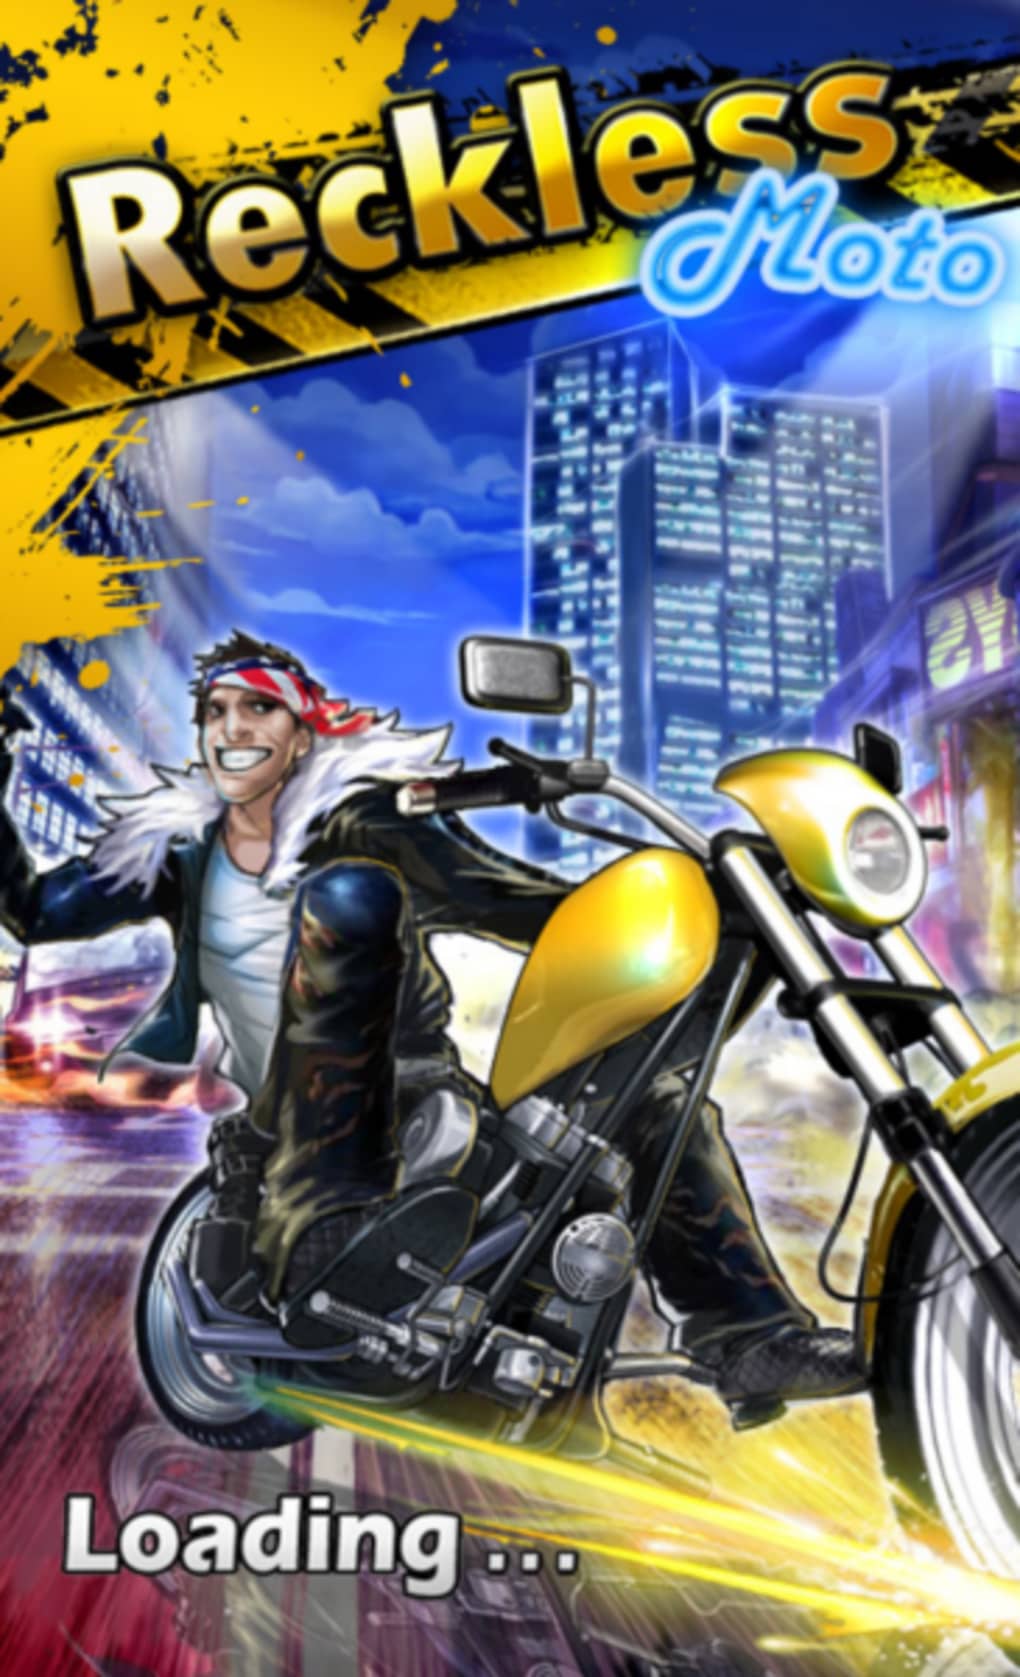 About: Reckless Moto Rider (Google Play version)